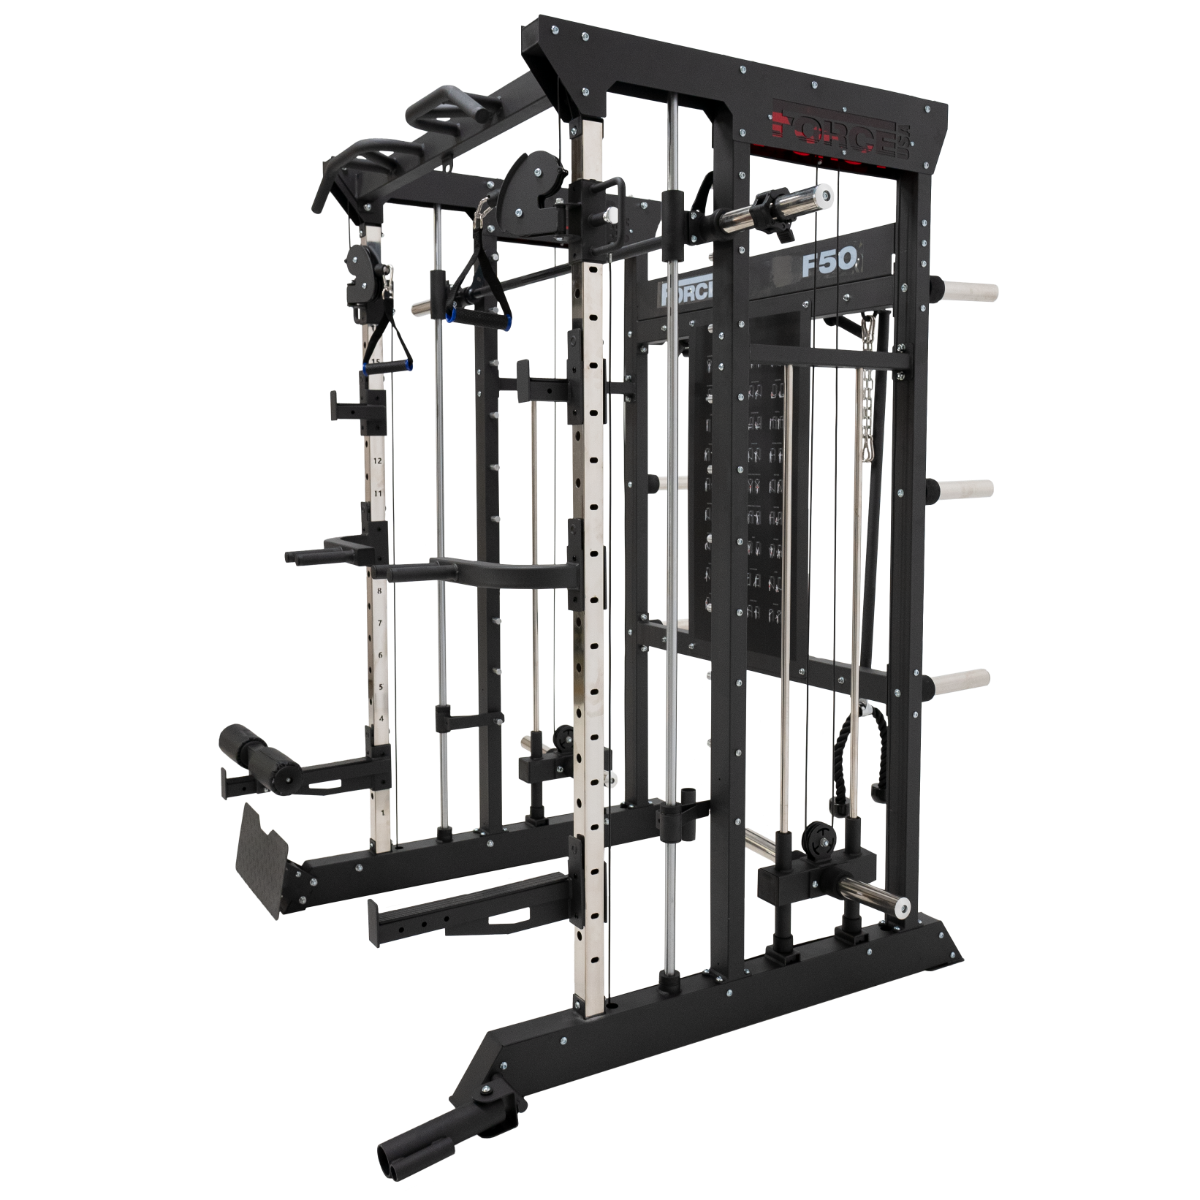 Force USA F50 V2 - All In One Functional Trainer